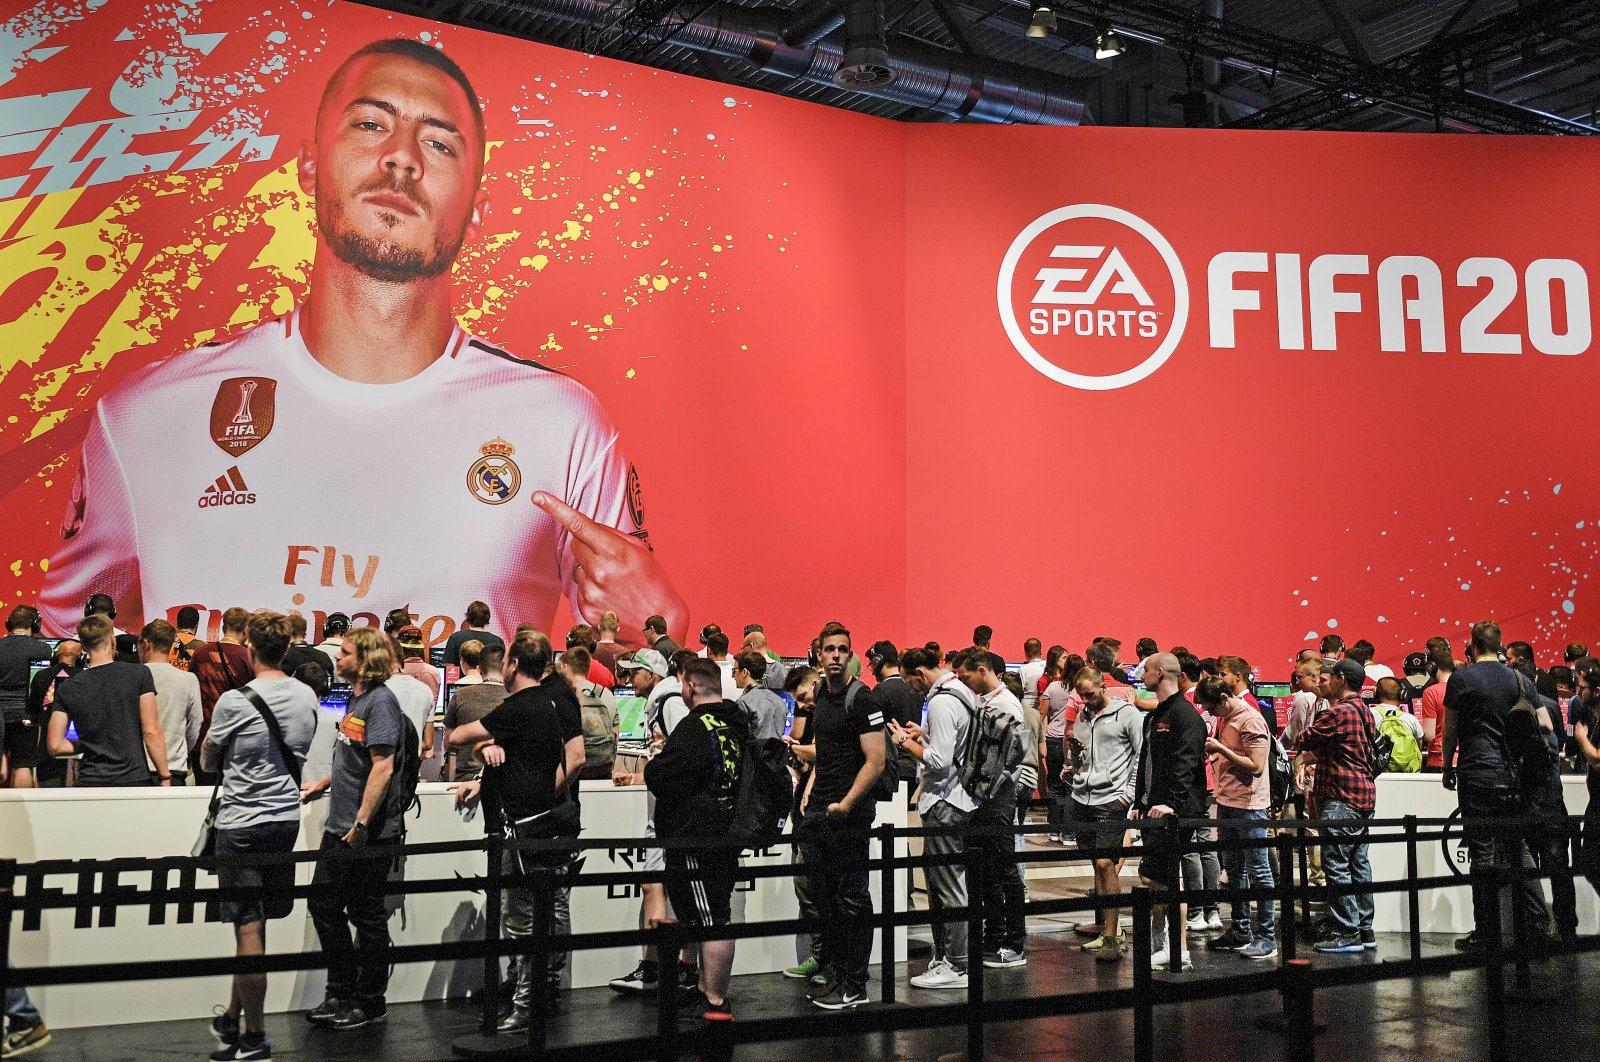 Fans check EA Sports FIFA 20 video game at the Gamescom, Cologne, Germany, Aug. 20, 2019. (AP Photo)